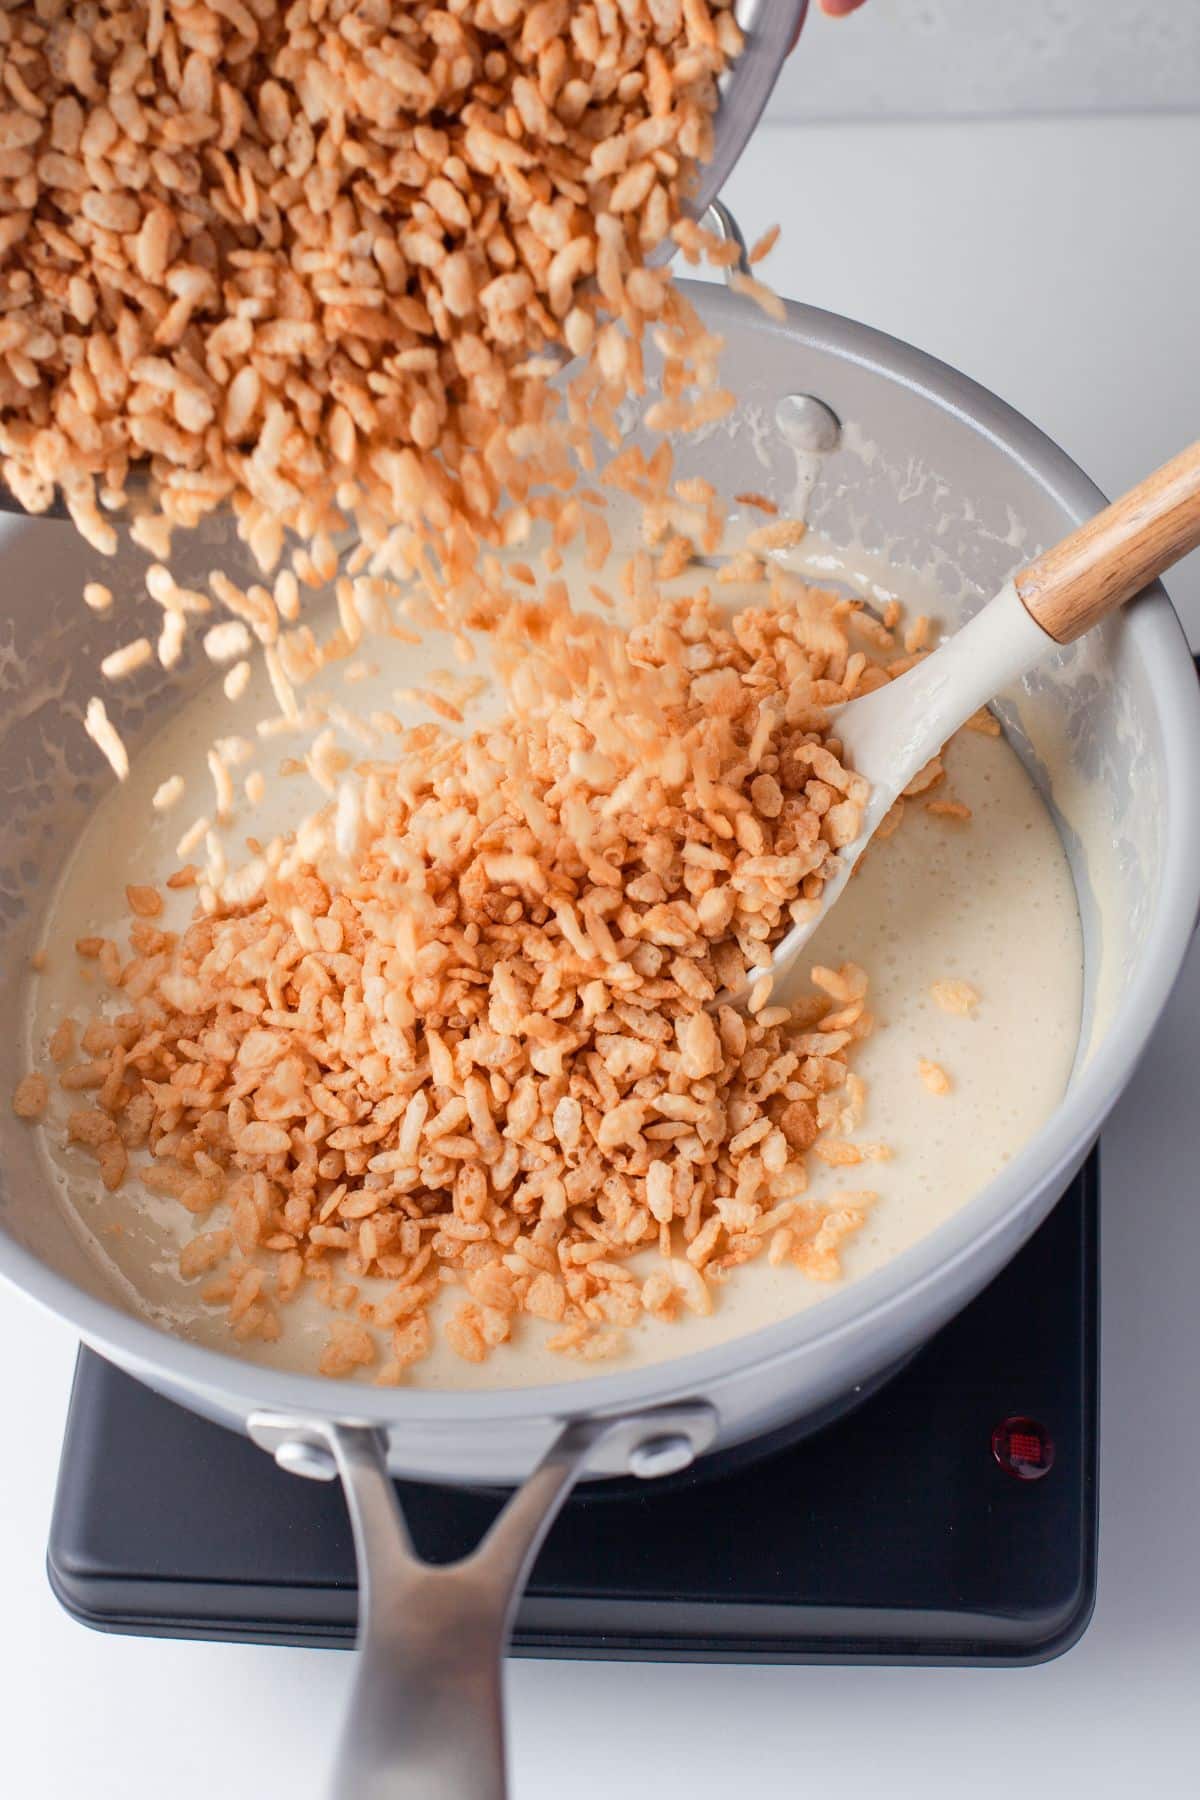 rice krispies being poured into melted marshmallow mixture